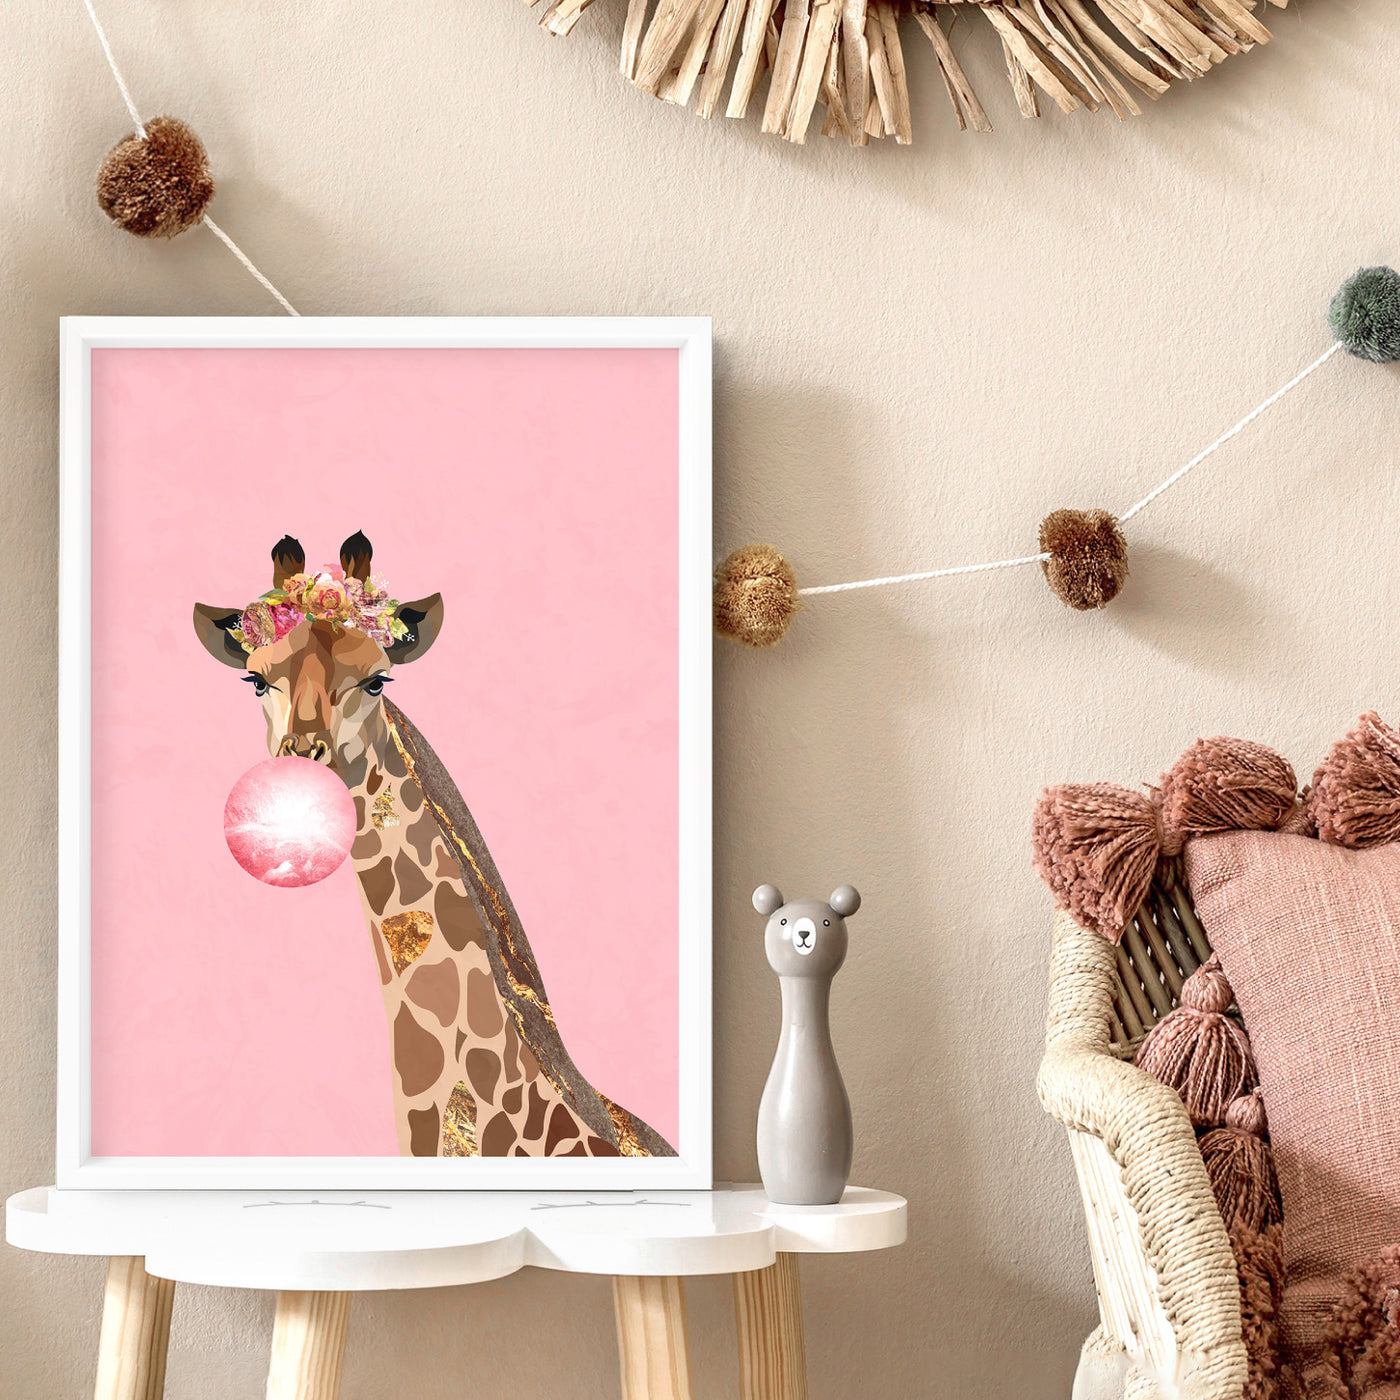 Giraffe Pop - Art Print, Poster, Stretched Canvas or Framed Wall Art Prints, shown framed in a room